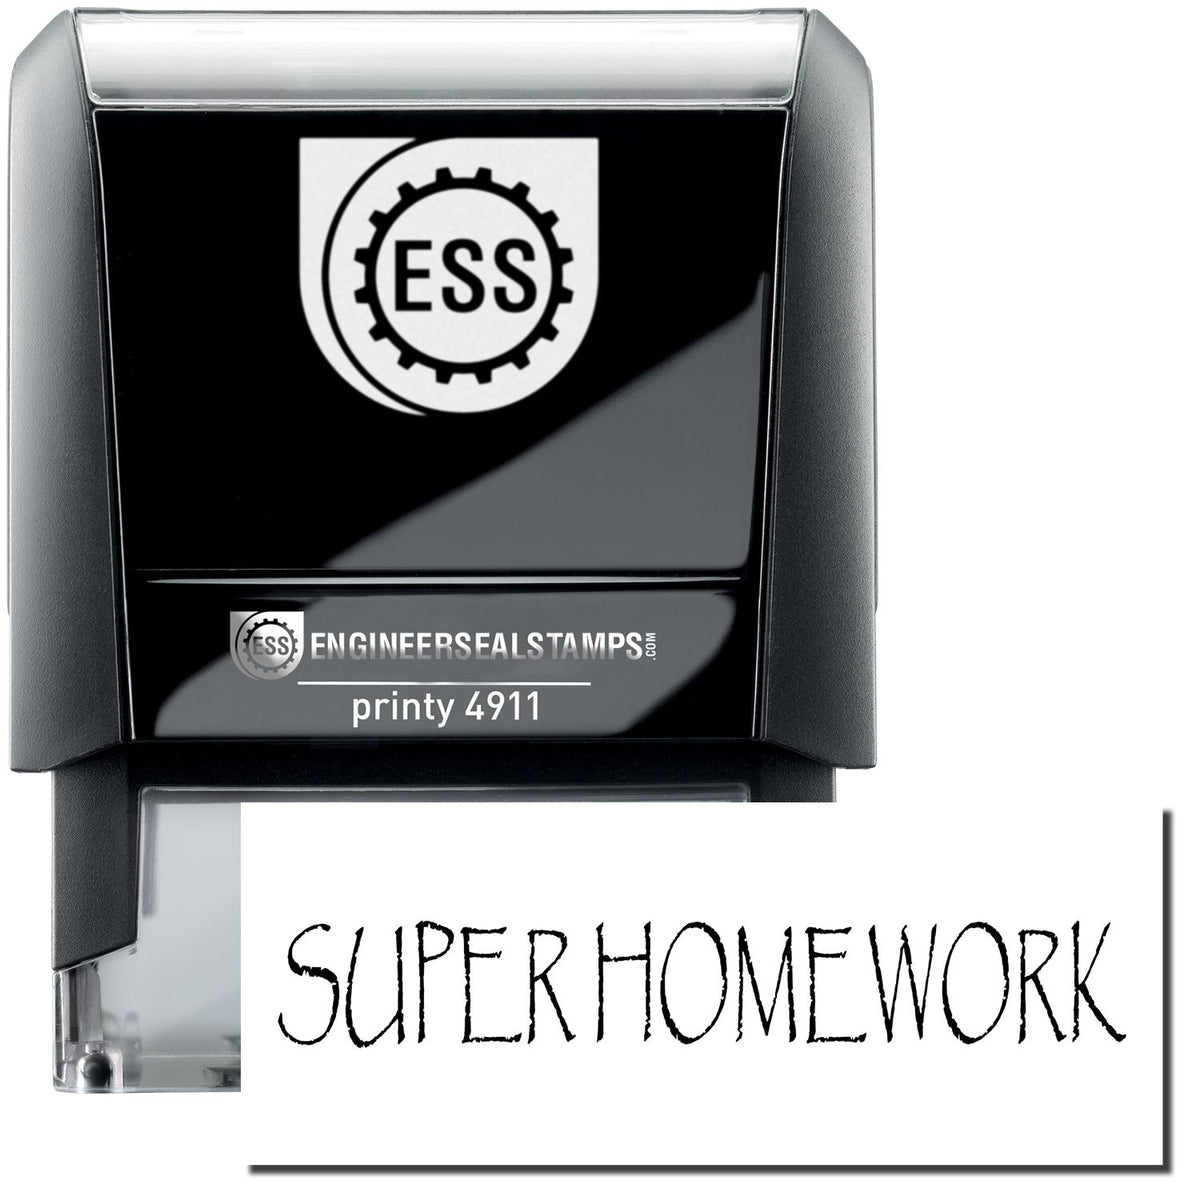 A self-inking stamp with a stamped image showing how the text &quot;SUPER HOMEWORK&quot; is displayed after stamping.